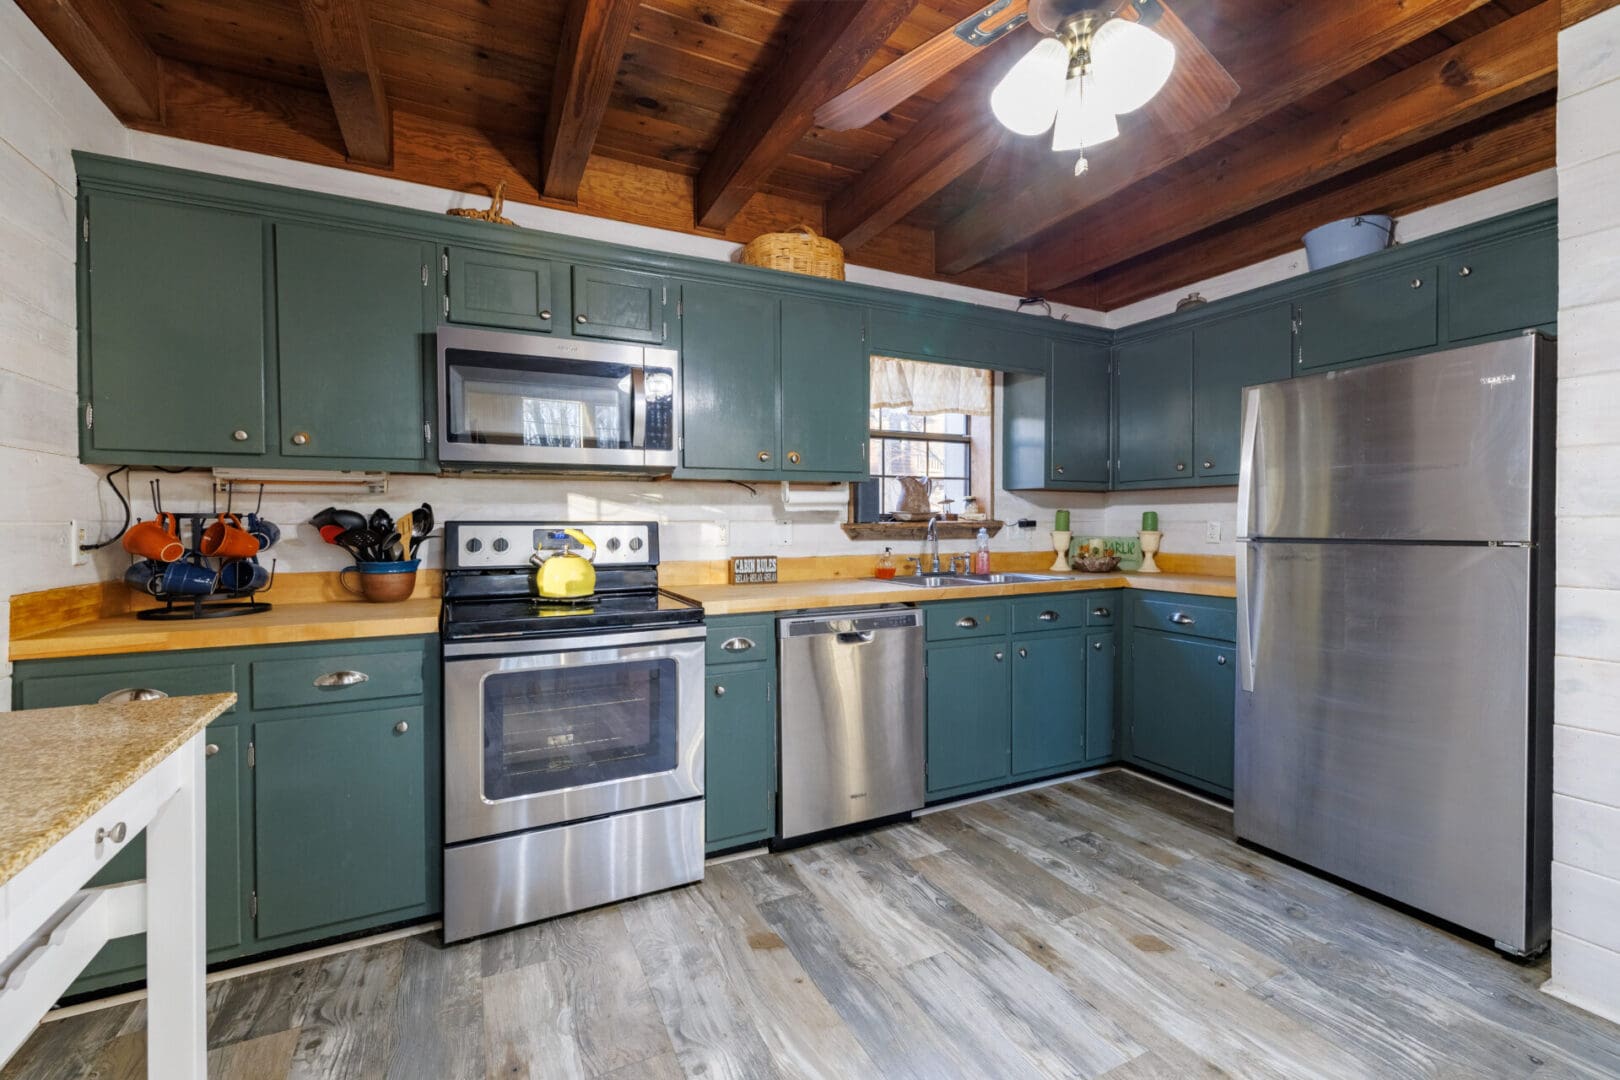 A vacation kitchen with green cabinets and stainless steel appliances.